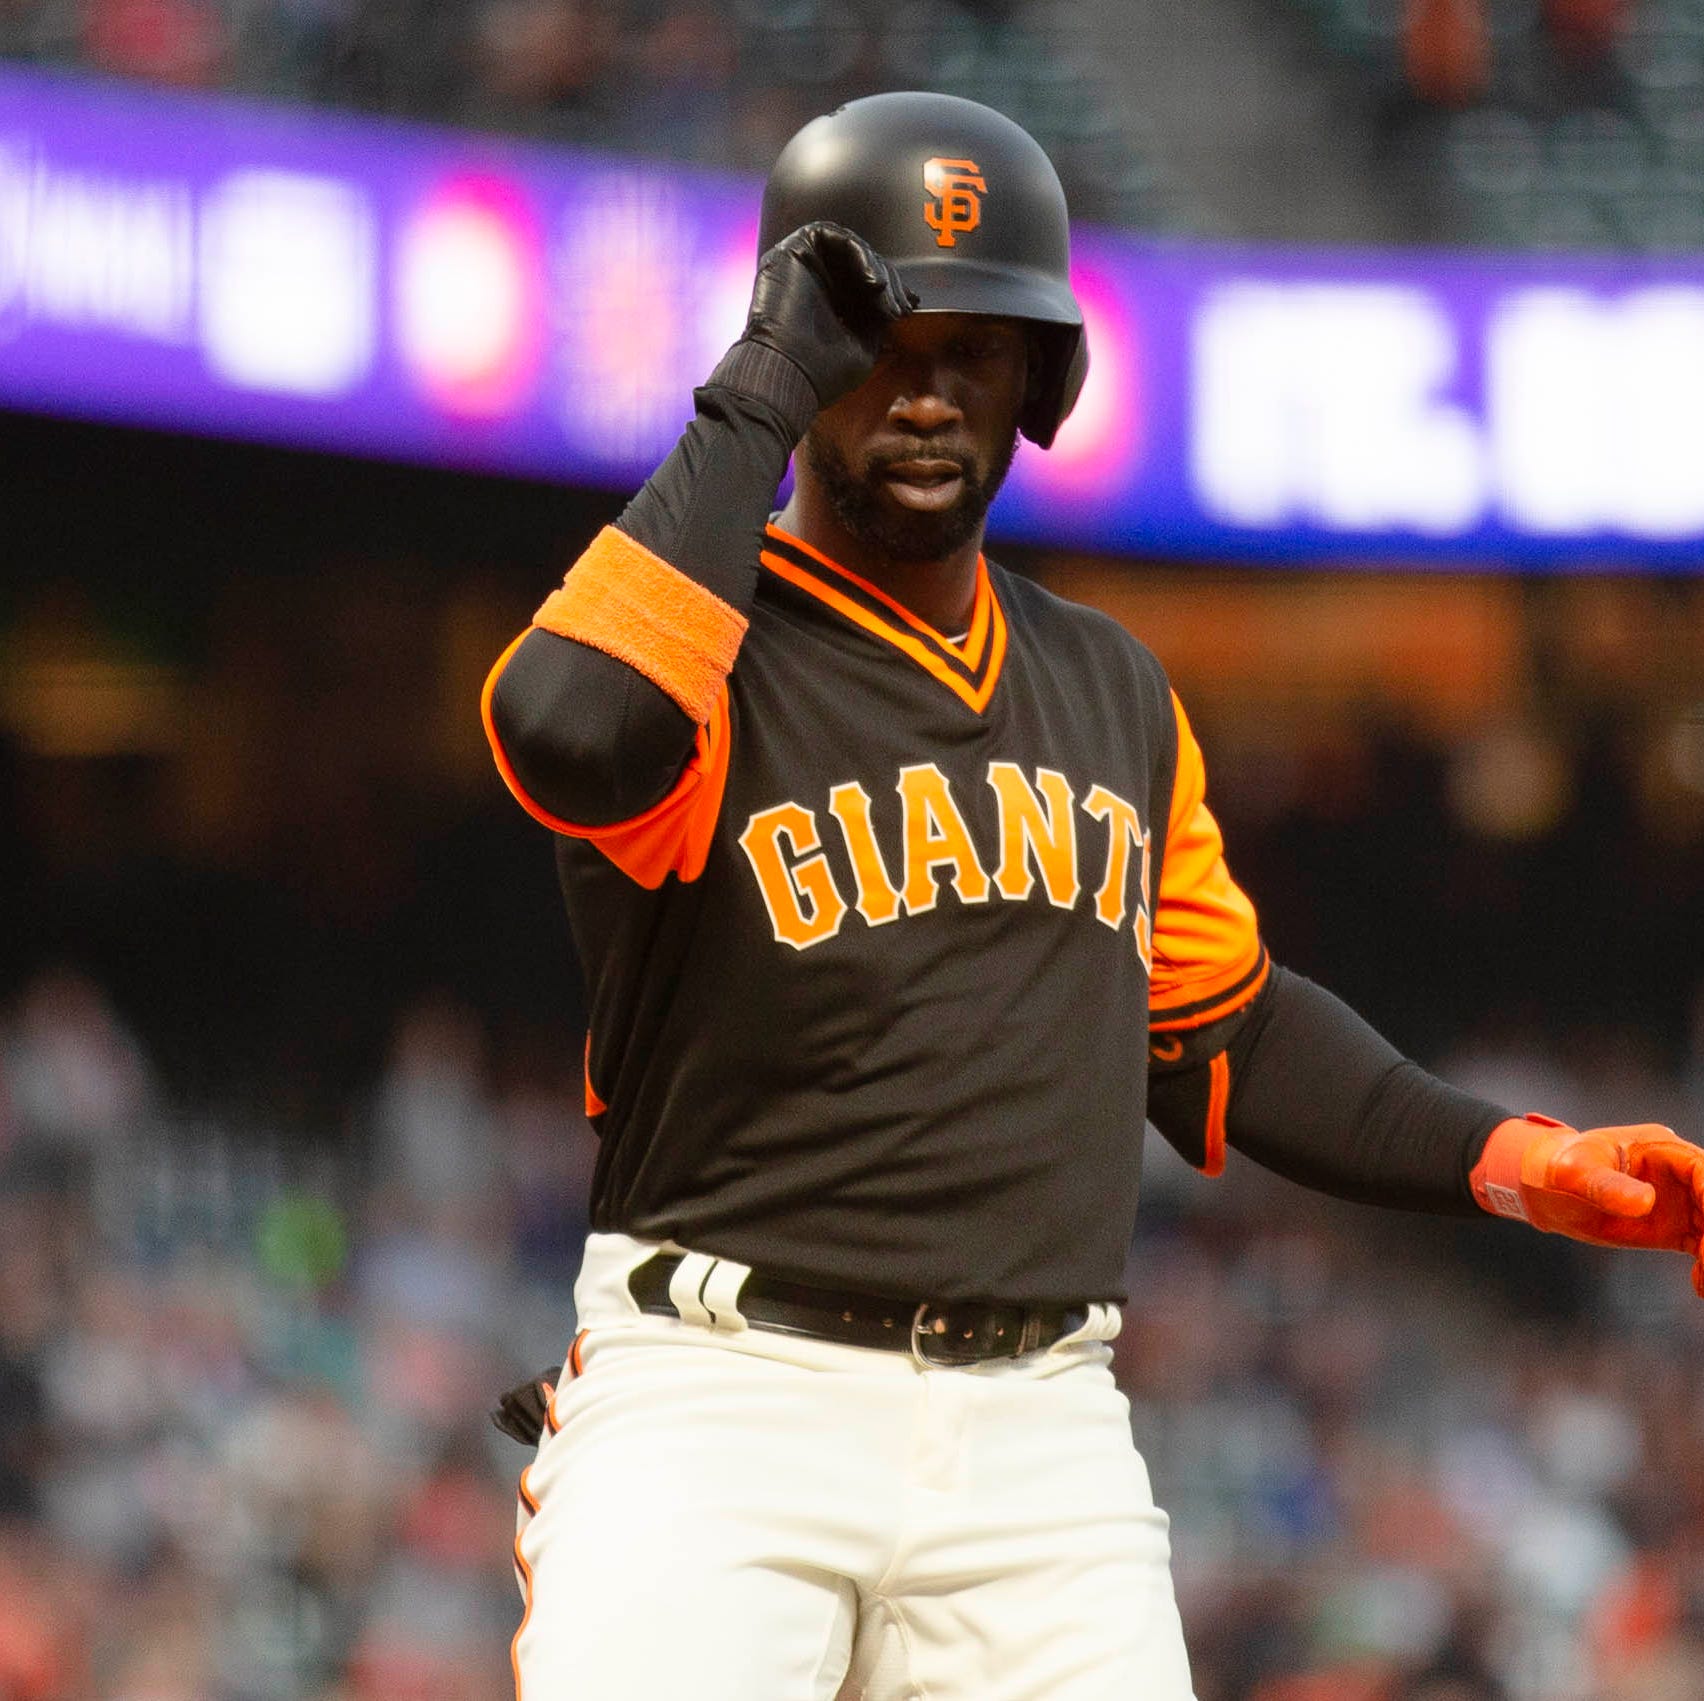 McCutchen had a .357 OBP with the Giants this season.